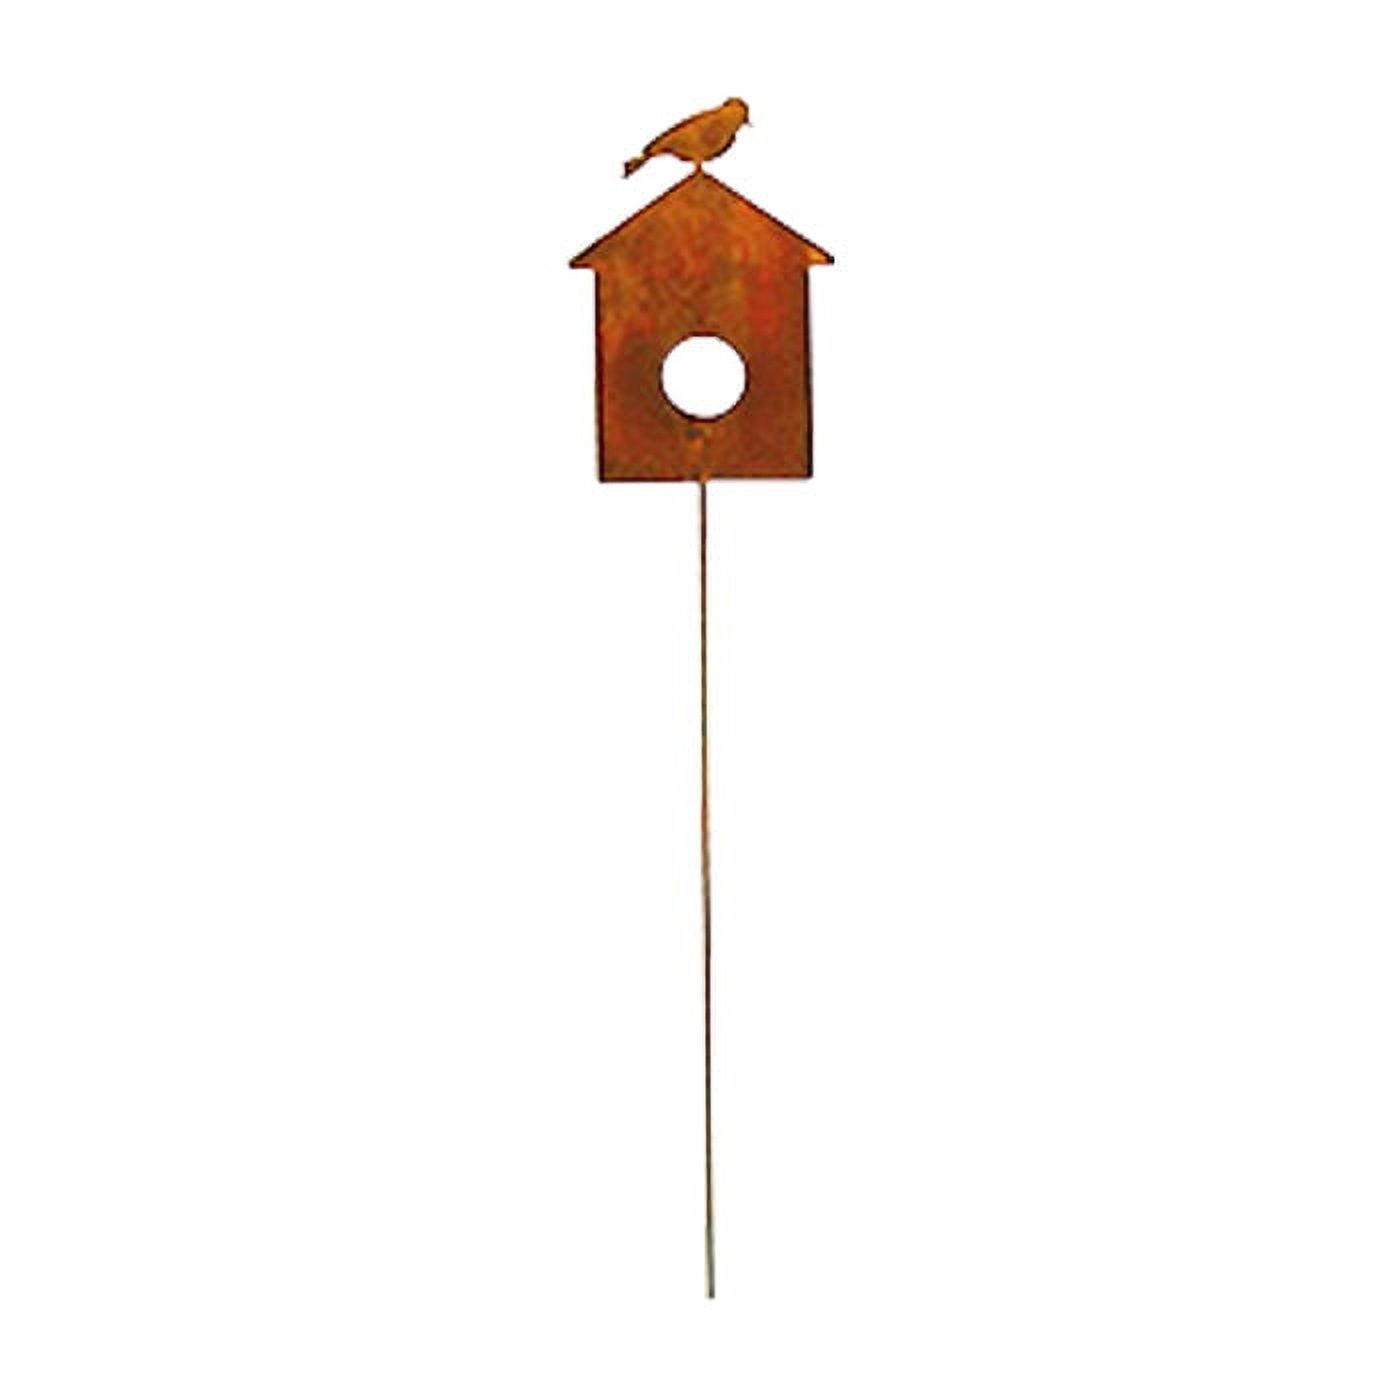 Village Wrought Iron RGS-99 Bird House Rusted Stake - image 4 of 4